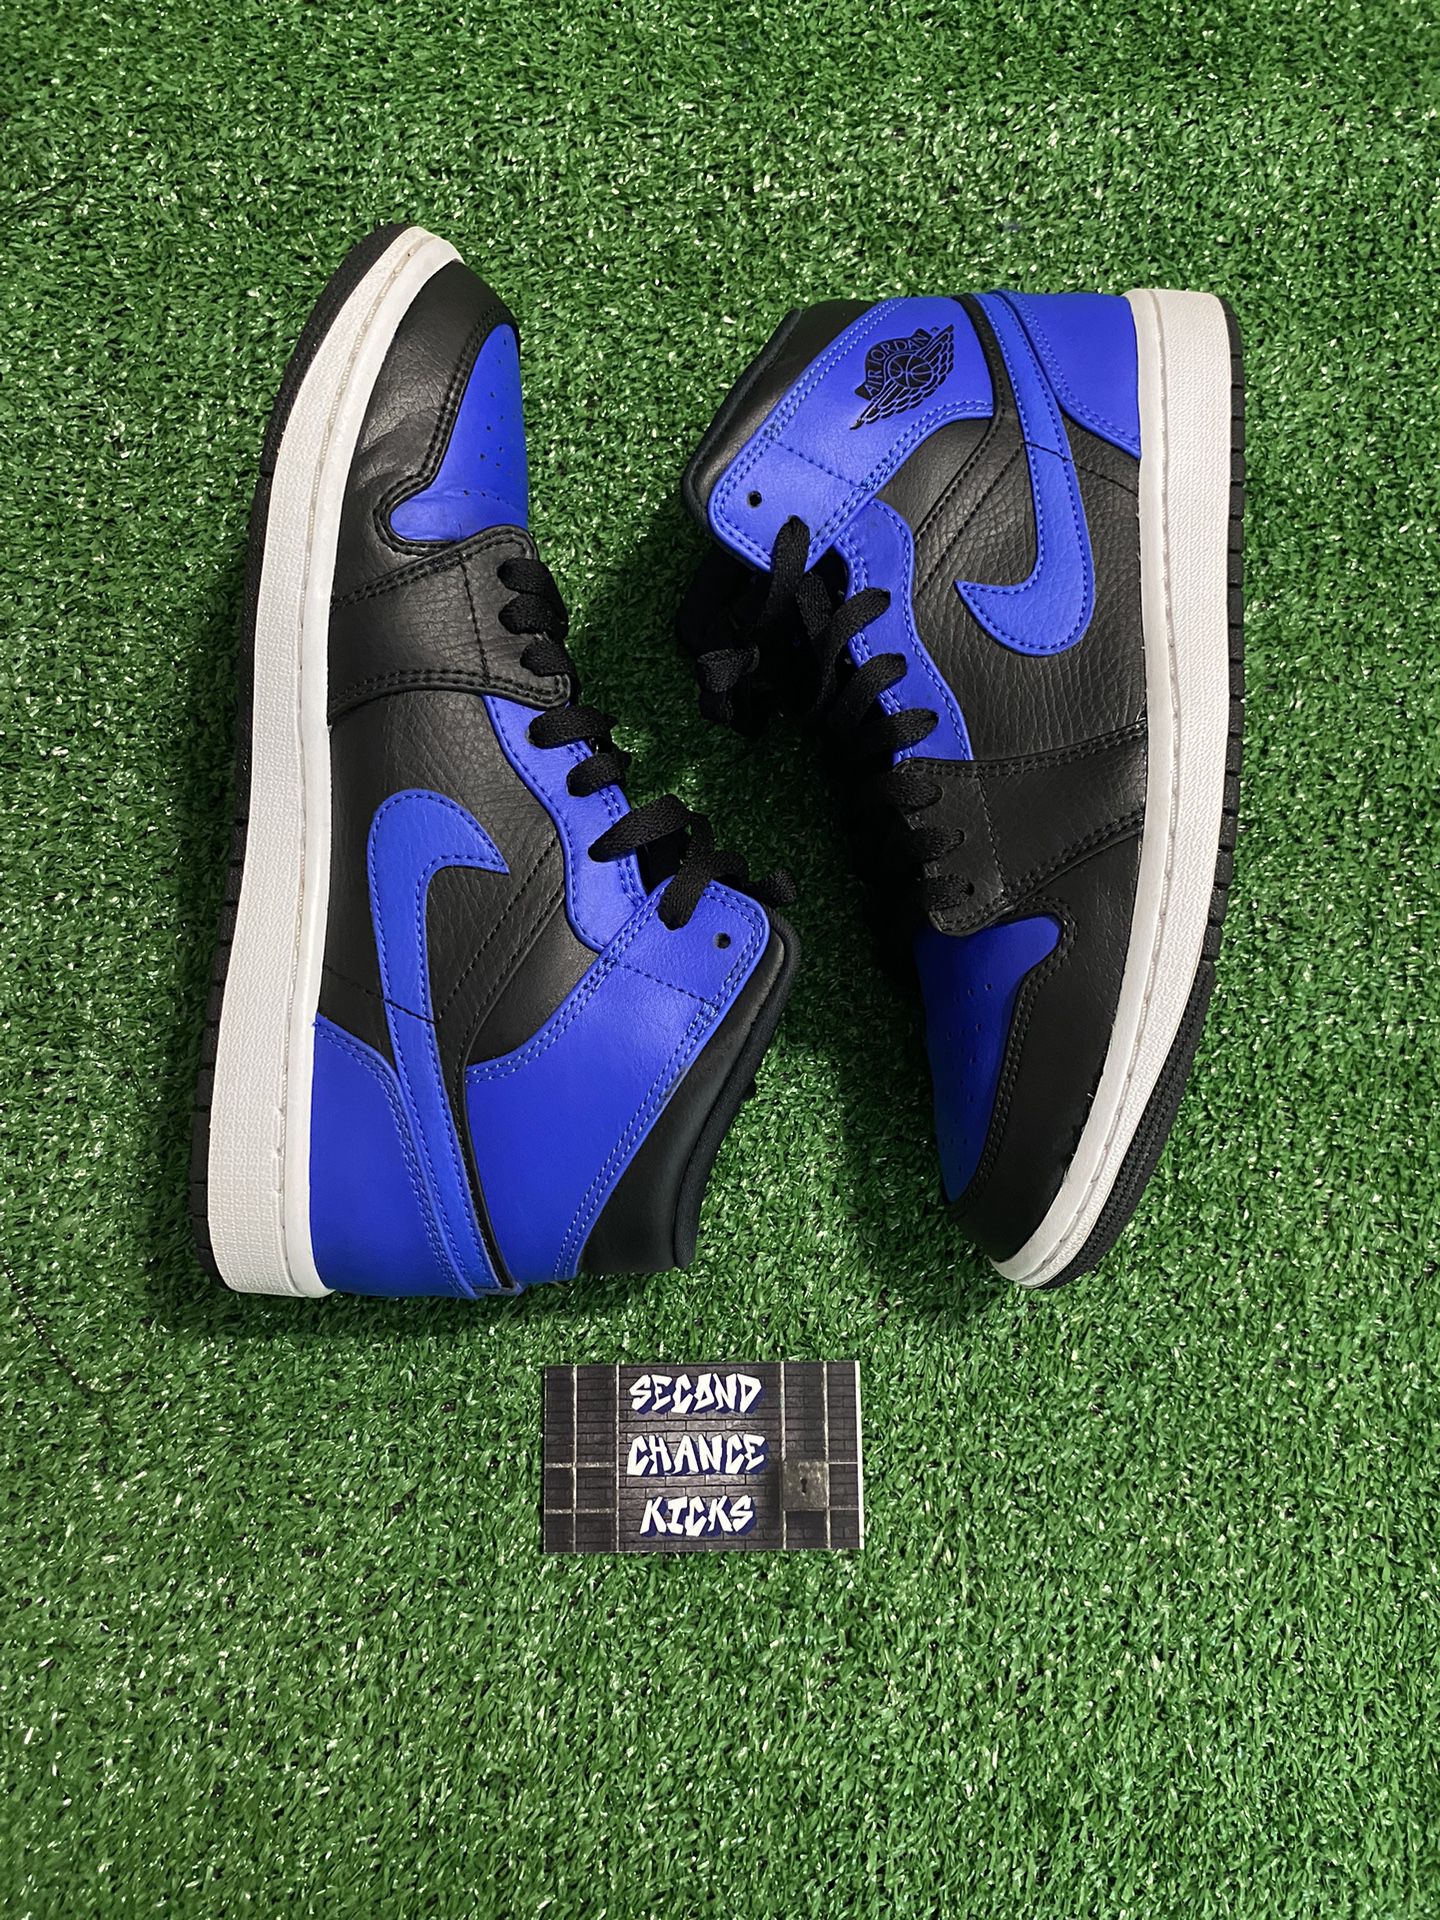 Nike Air Jordan 1 Hyper Royals 100% Authentic for Sale in Scarsdale, NY -  OfferUp